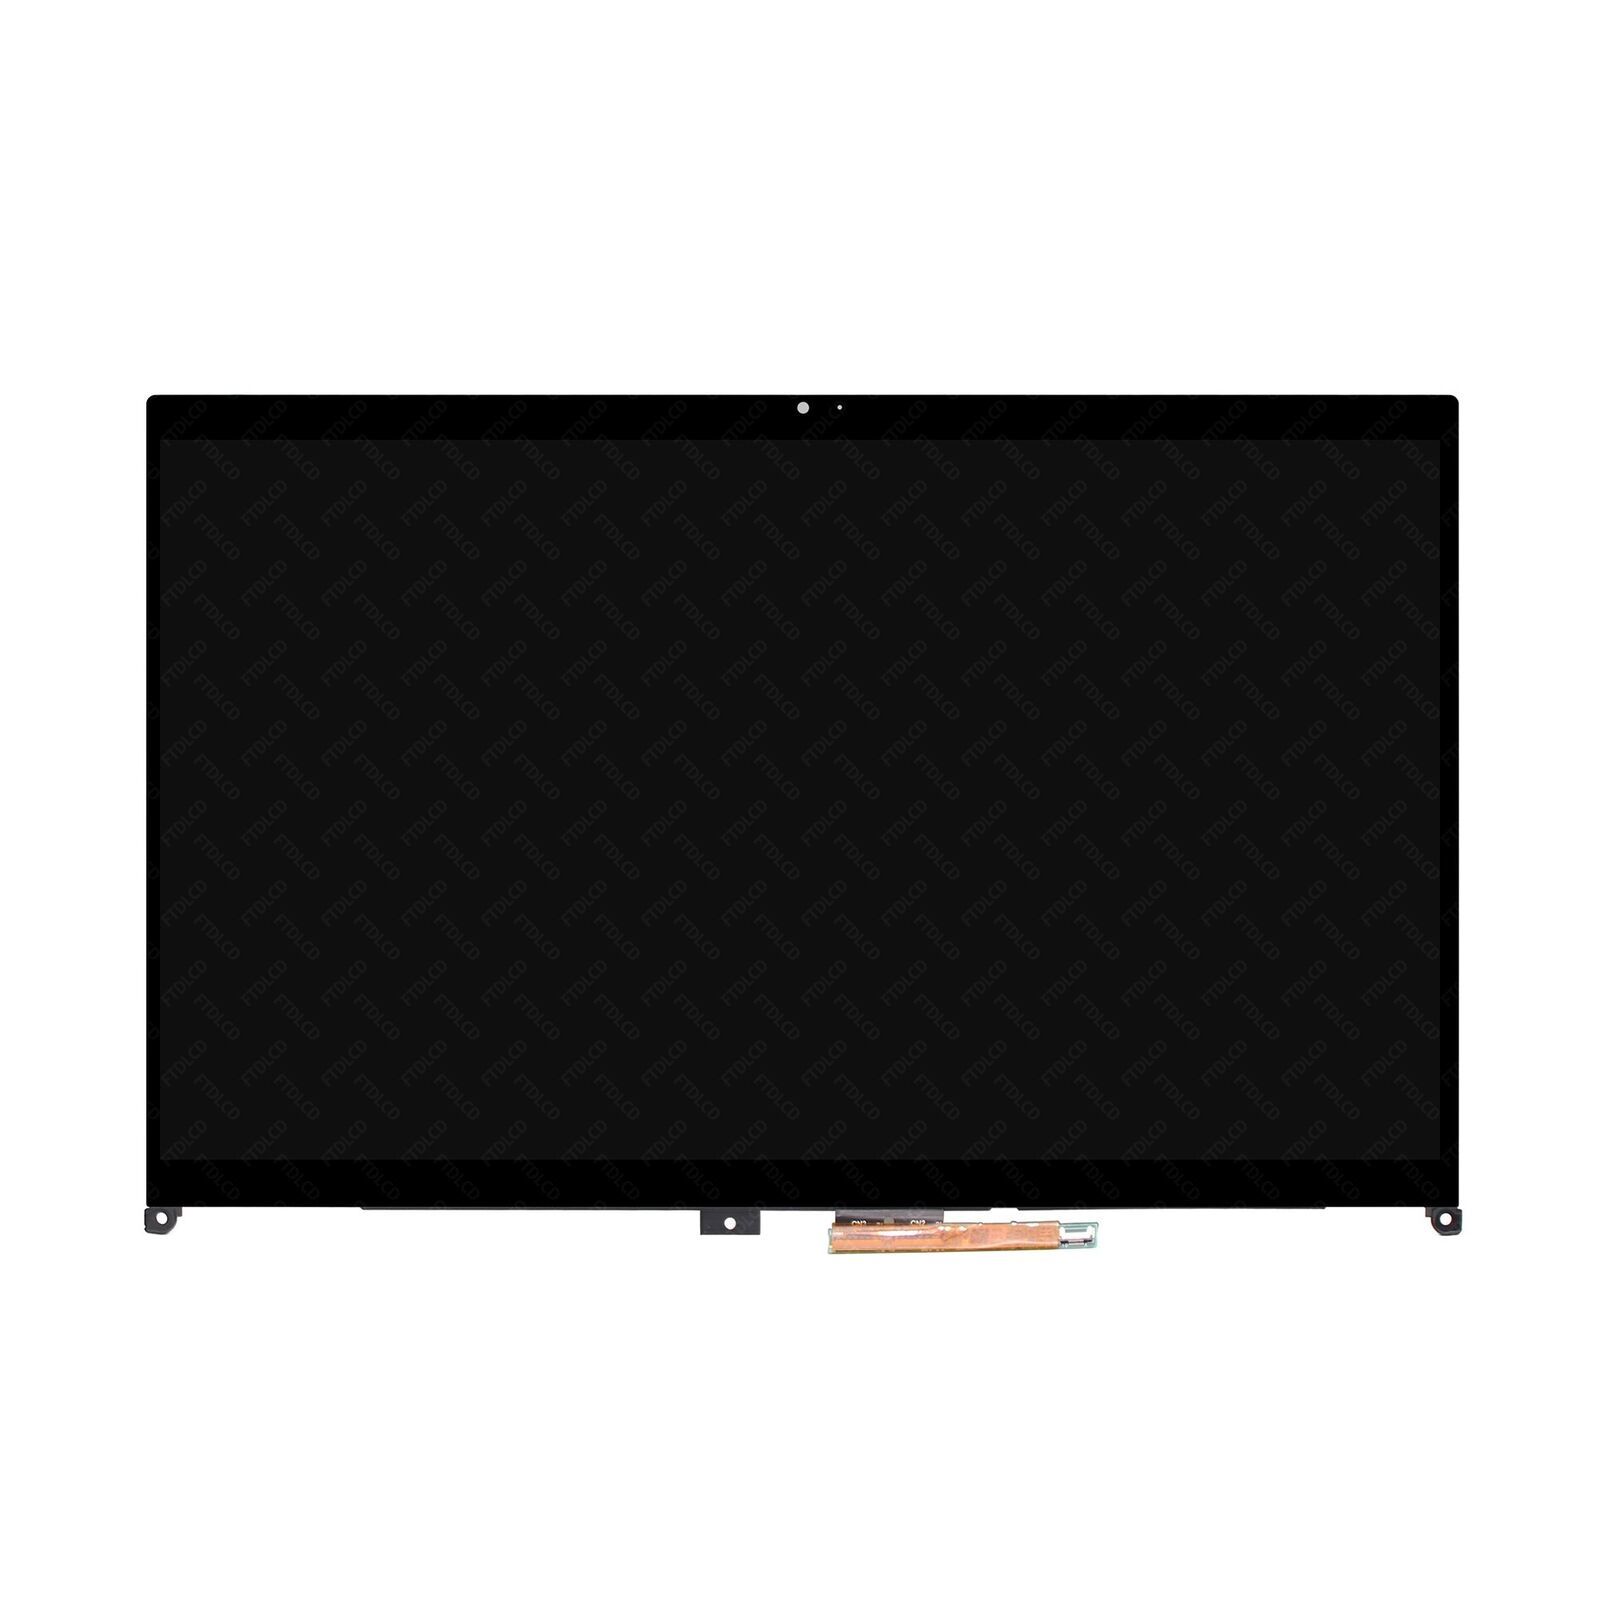 Primary image for 5D10S39643 LCD Touch Screen Display Assembly for Lenovo Ideapad Flex 5 15IIL05